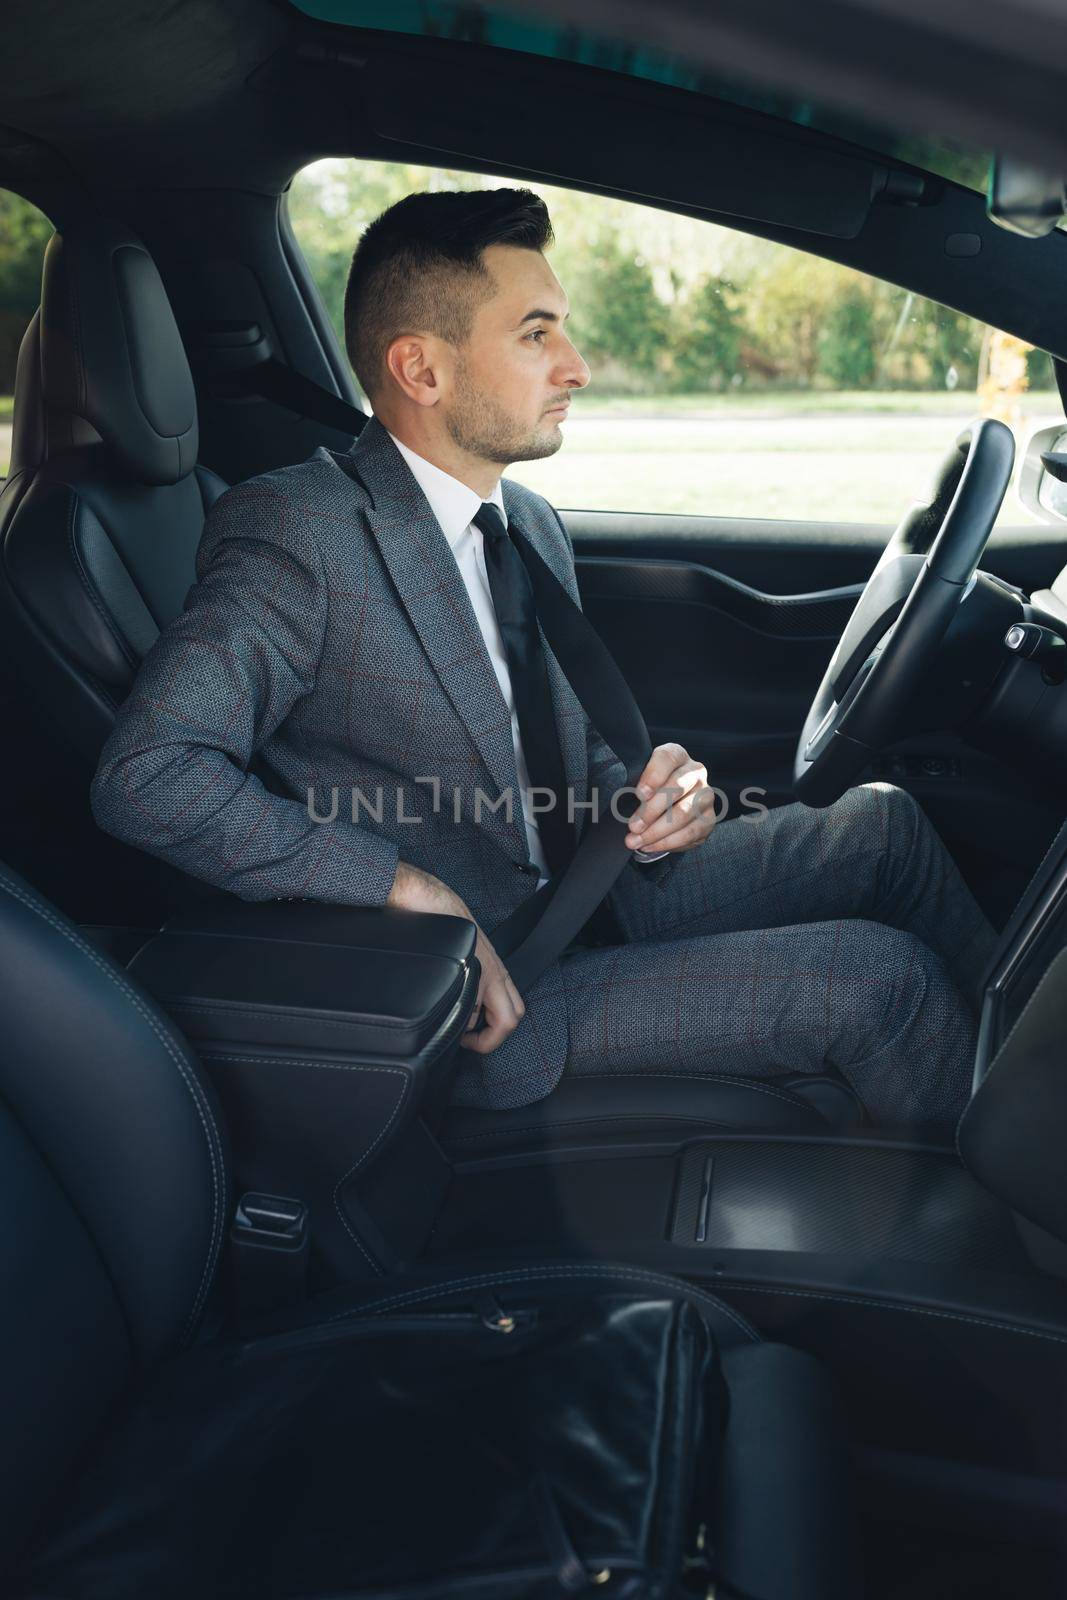 Handsome young man pinches seat belt and riding happily smiling. Joyfull driver. Lifestyle, road, car, driver concept. Protection of a person in vehicles. Road safety regulations concept. by uflypro